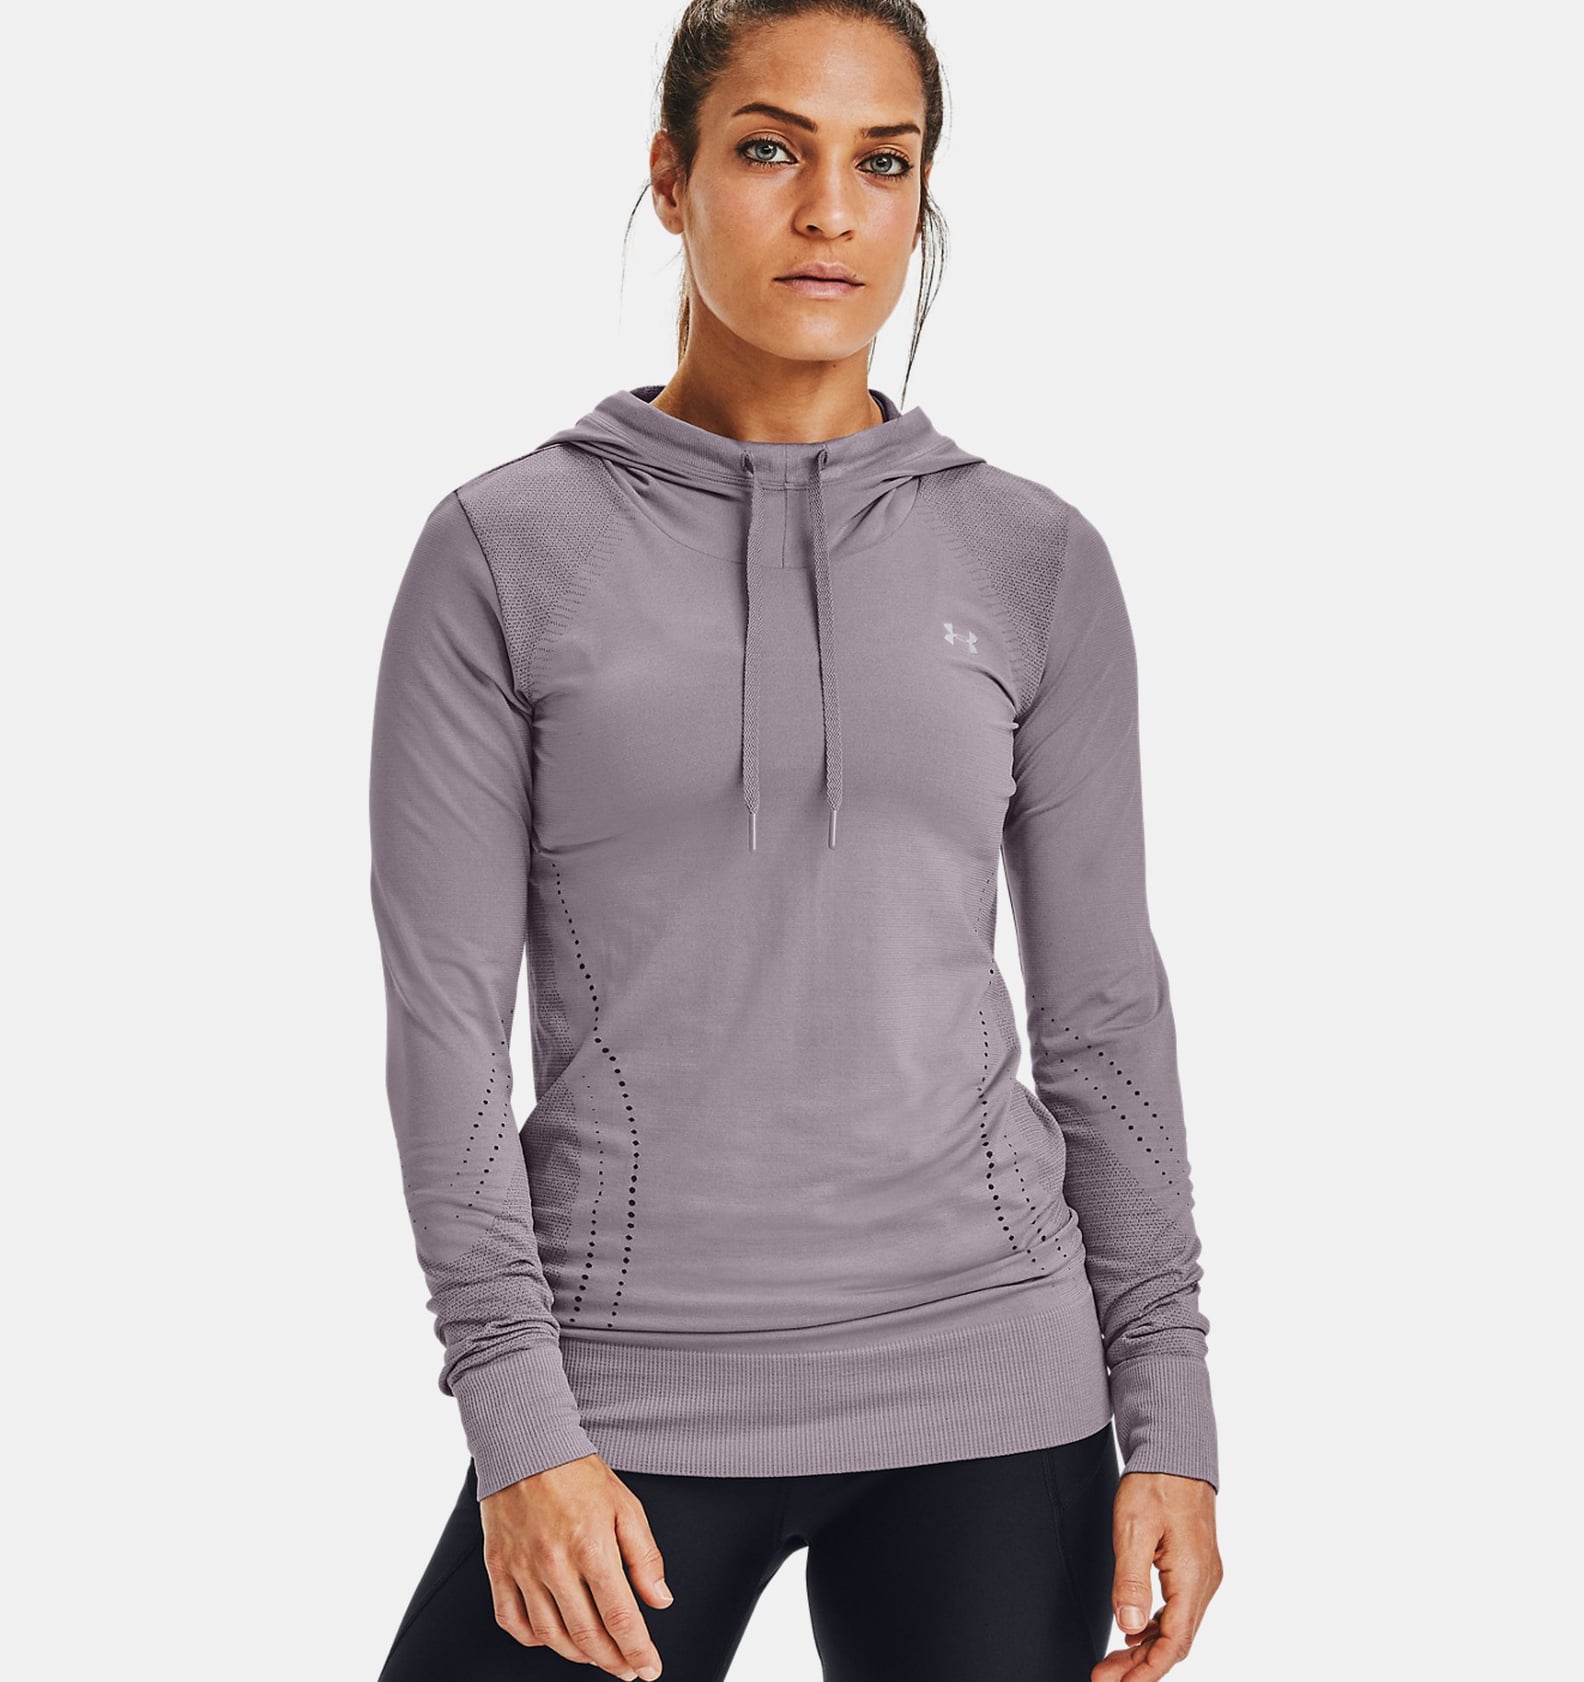 Under Armour Workout Clothes For a Sporty Weekend Trip | POPSUGAR Fitness